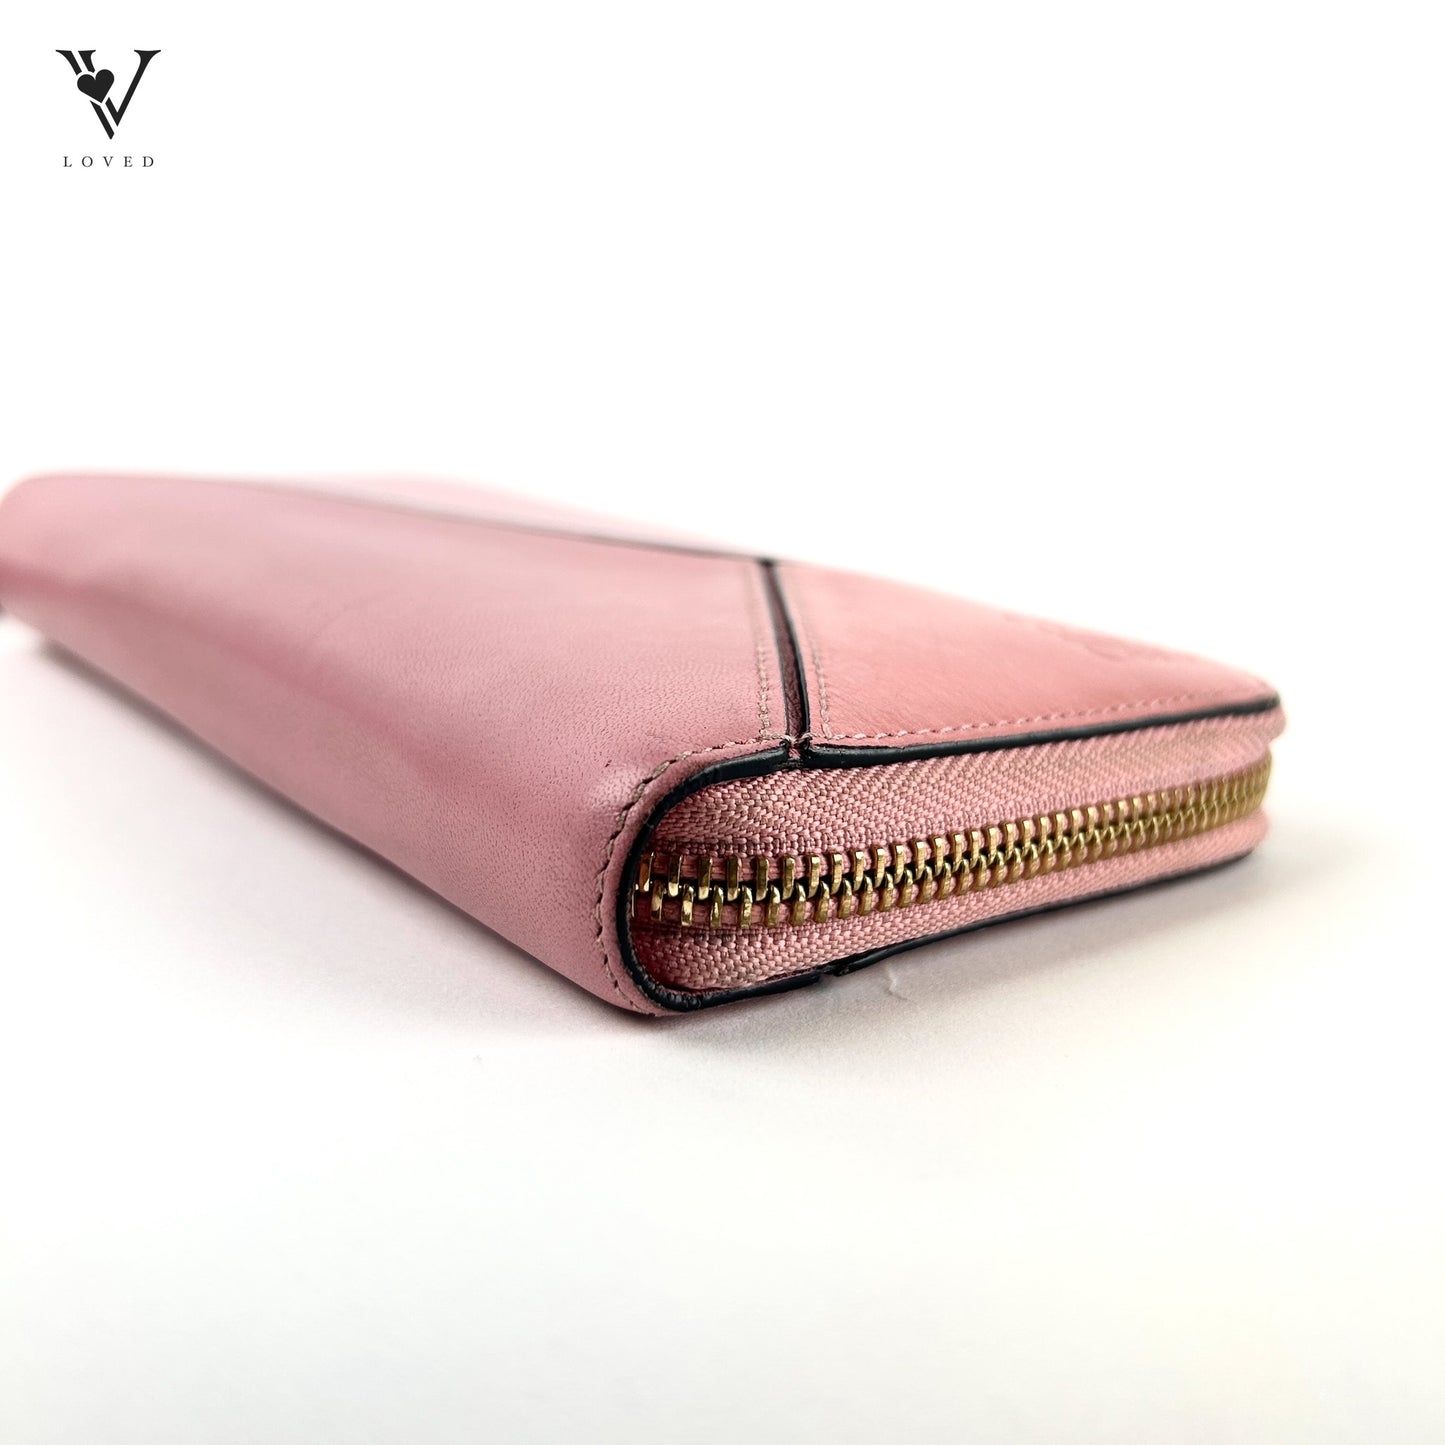 Puzzle Zipped Around Wallet in Classic Calfskin